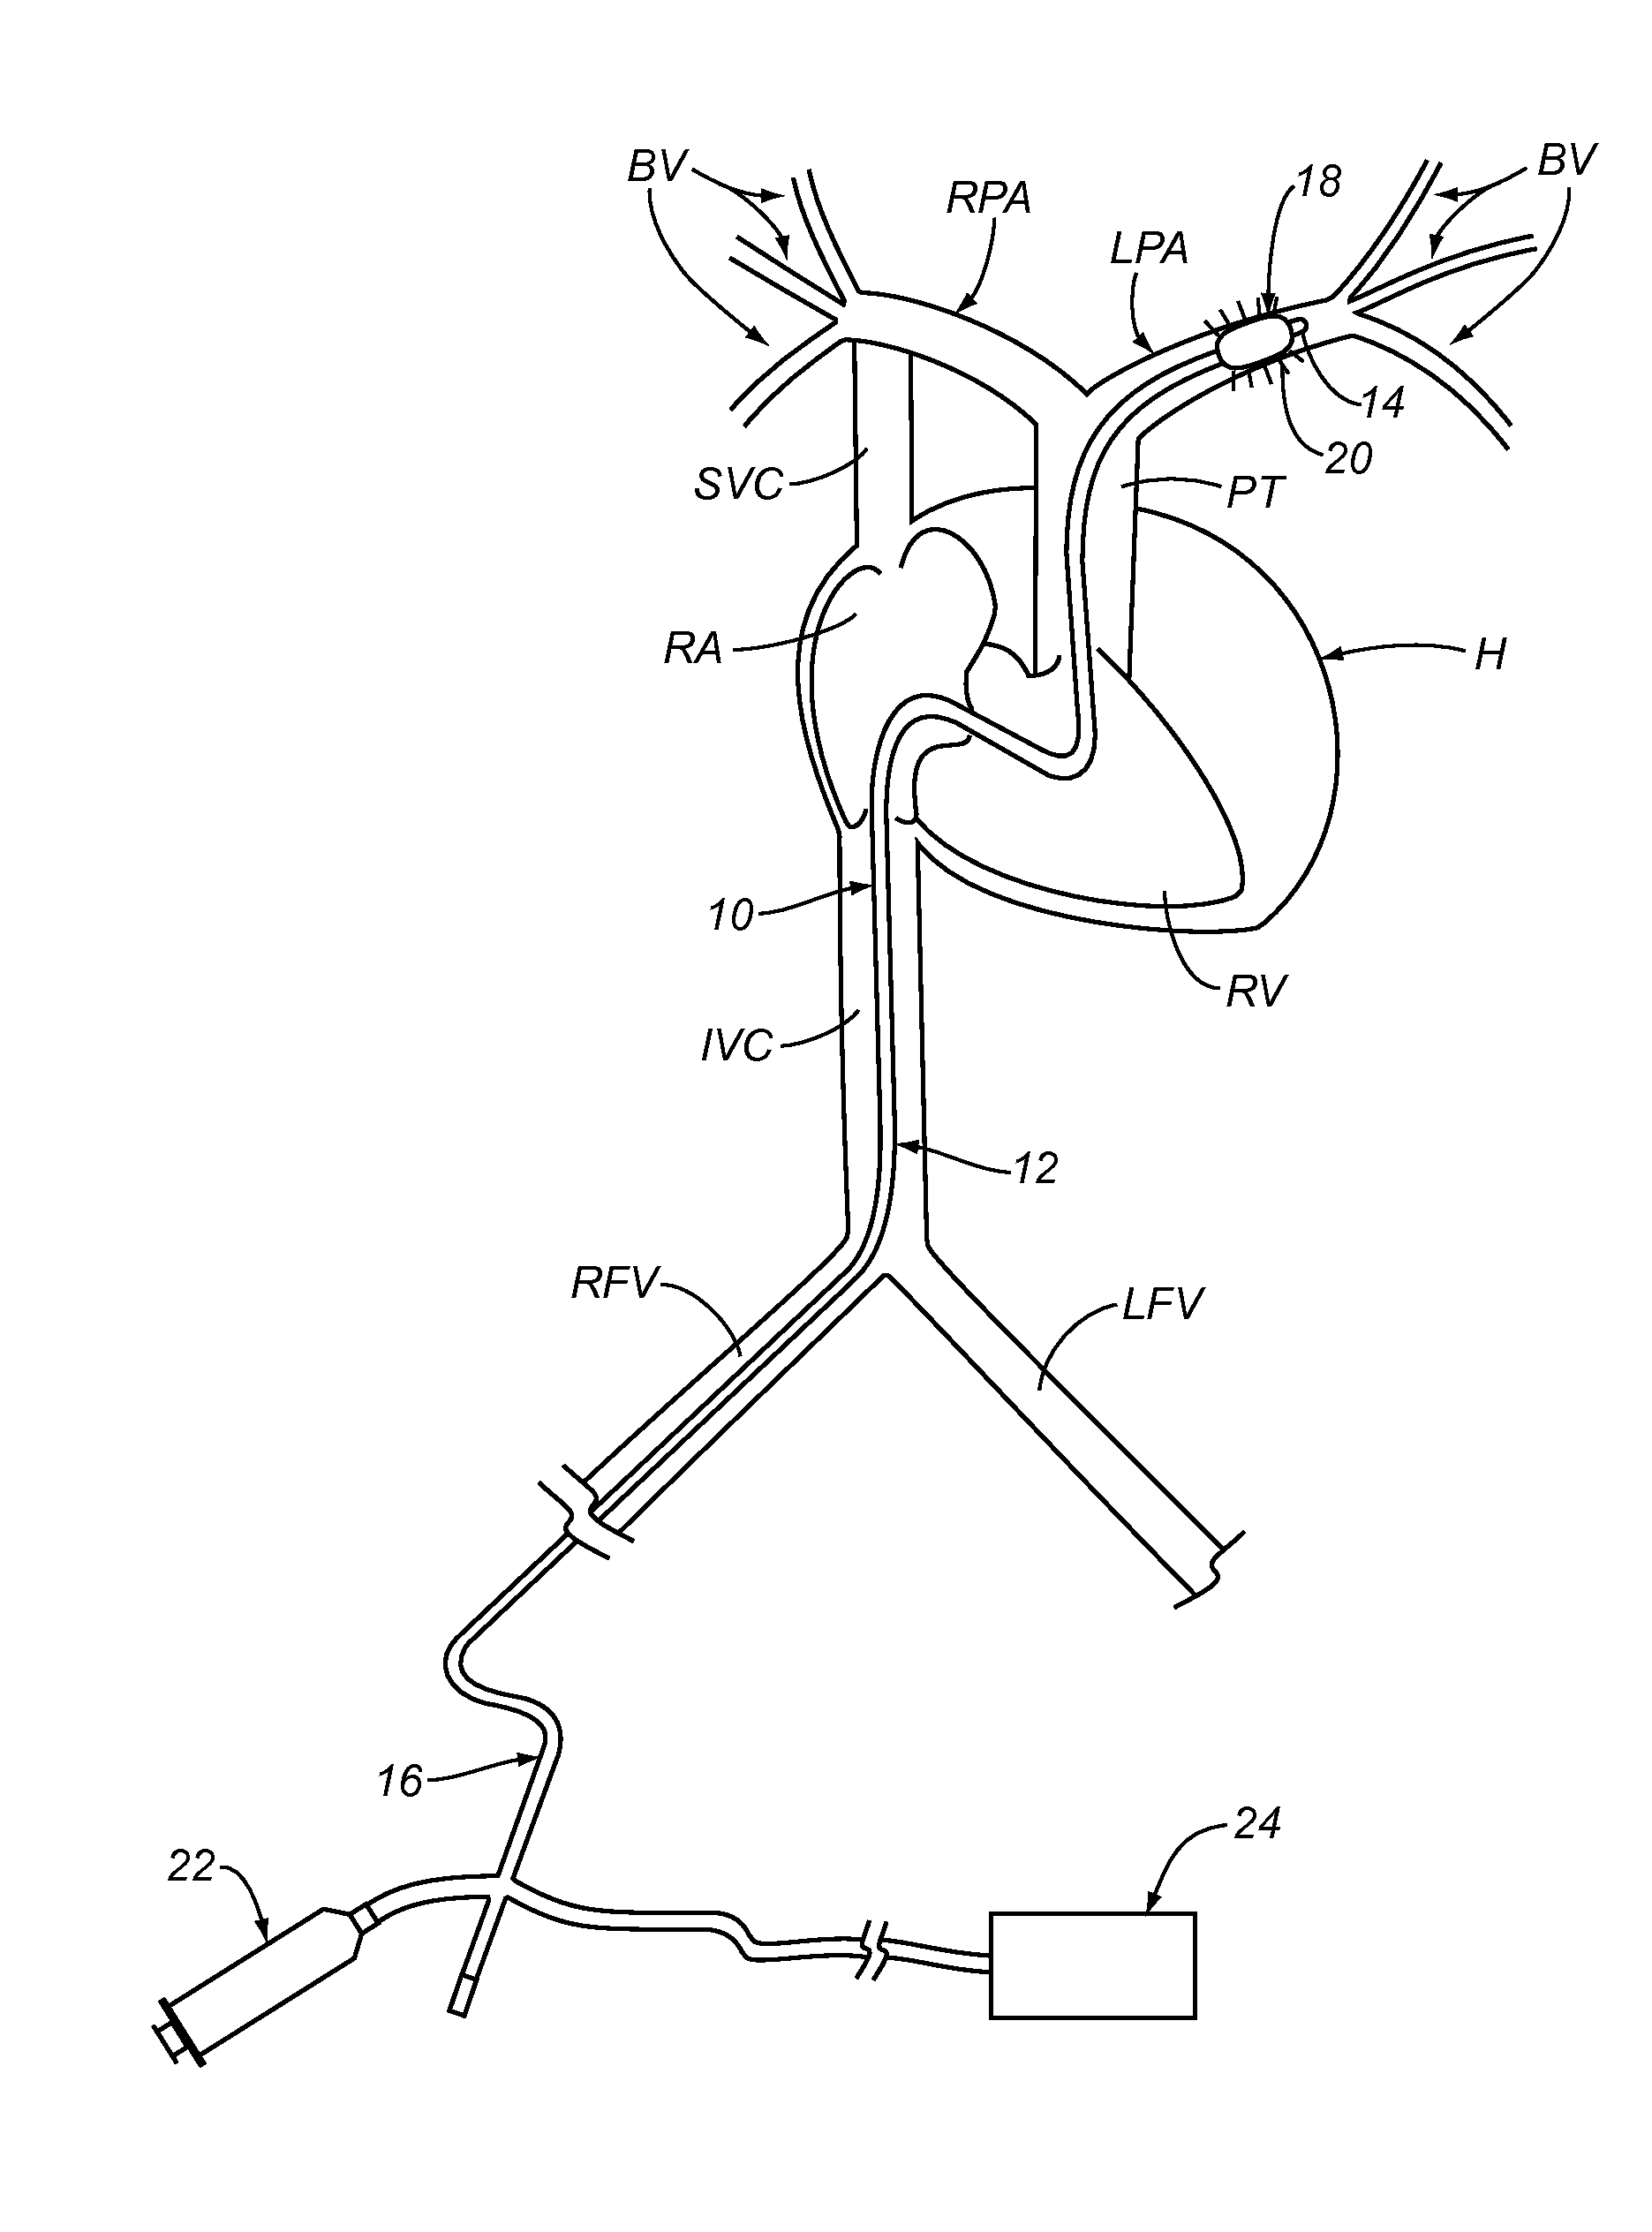 Apparatus and Methods For Treating Pulmonary Hypertension